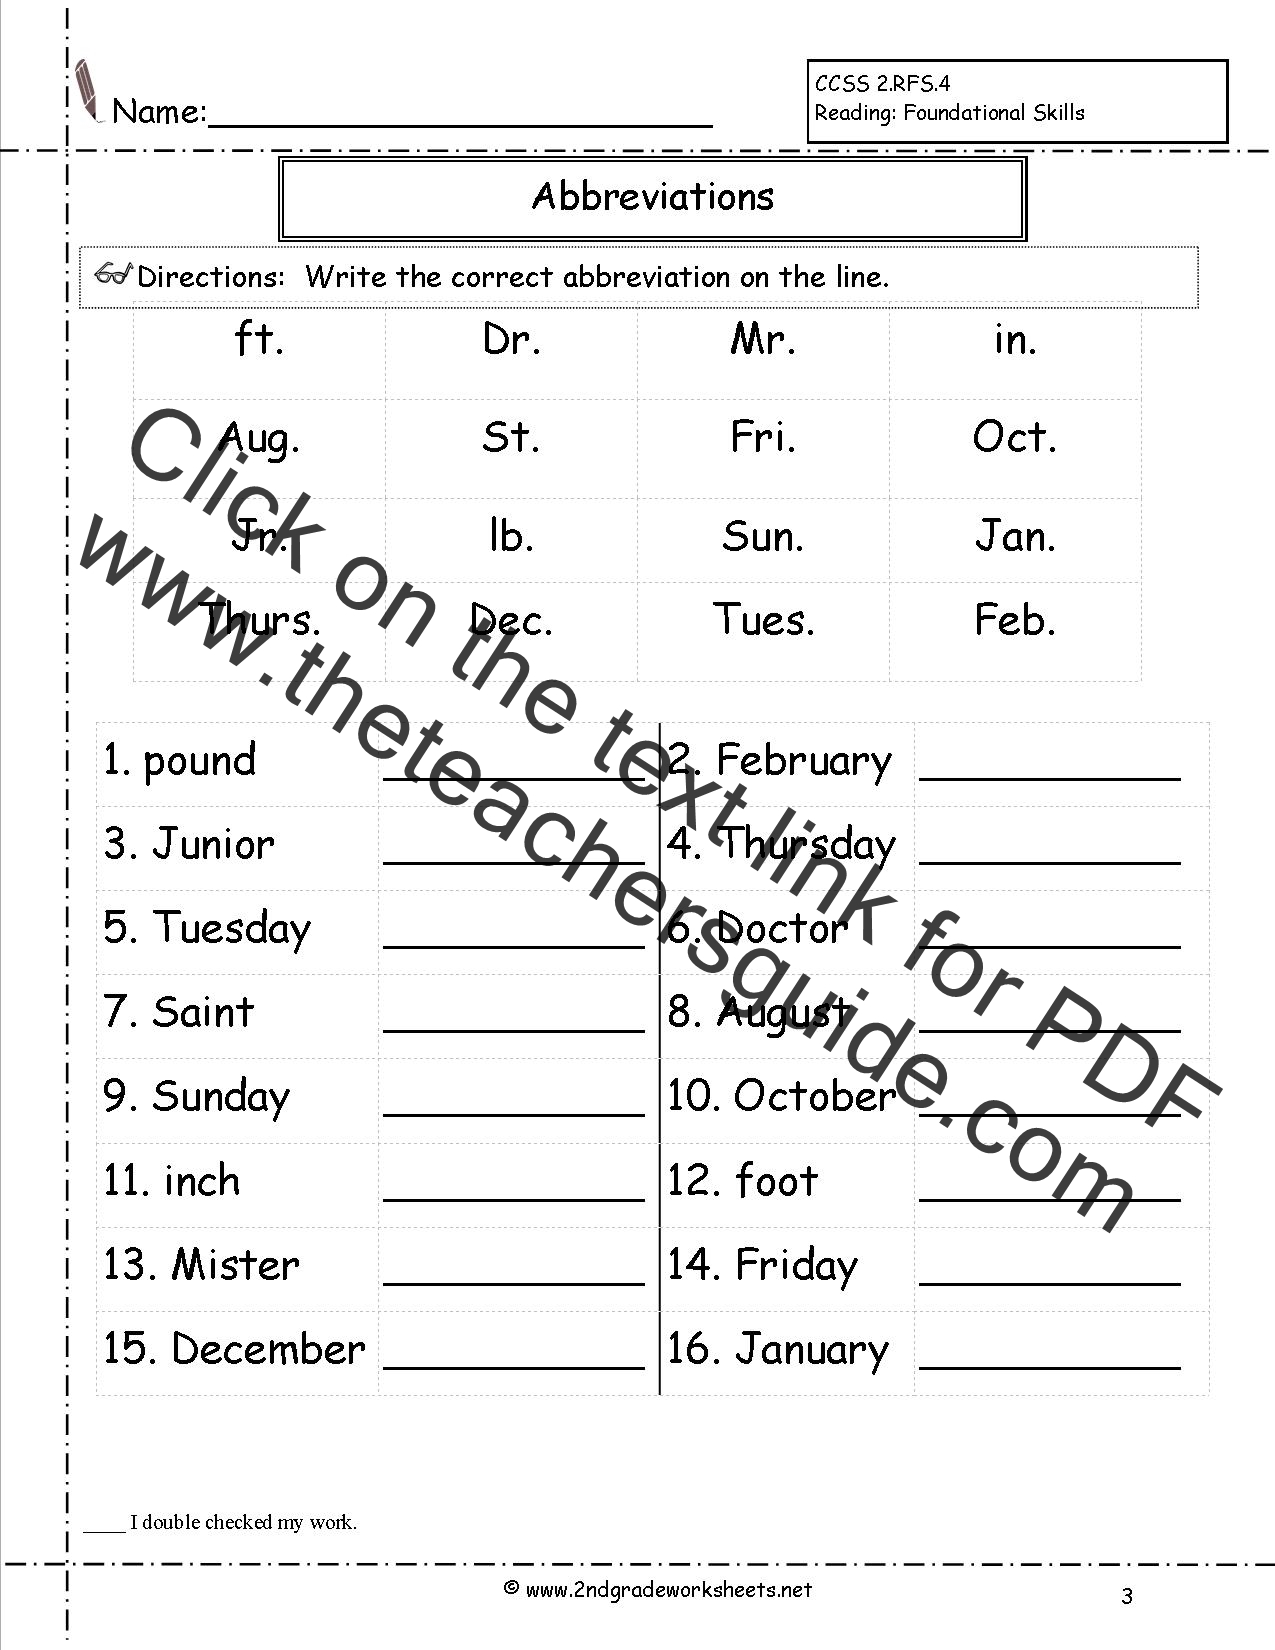 Abbreviation second Free and Printouts worksheets weather grade Worksheets